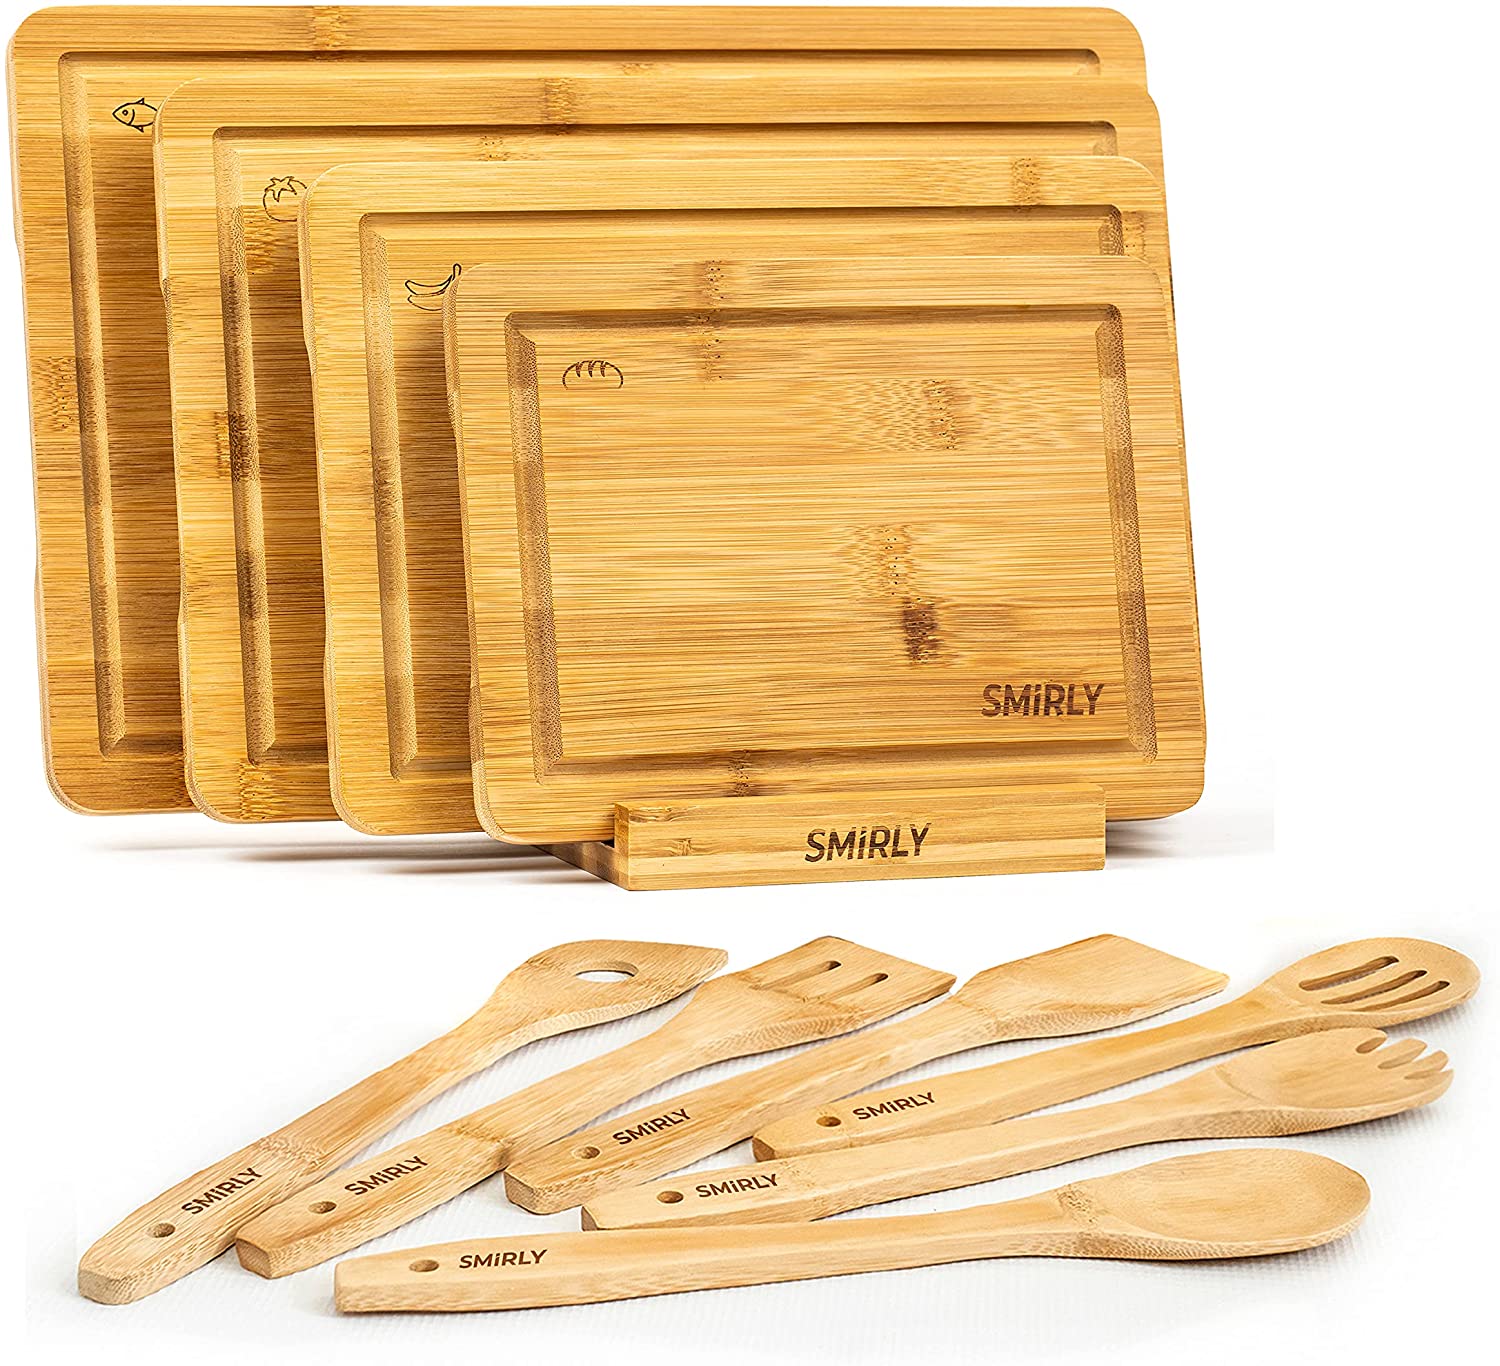 SMIRLY Wood Cutting Boards for Kitchen